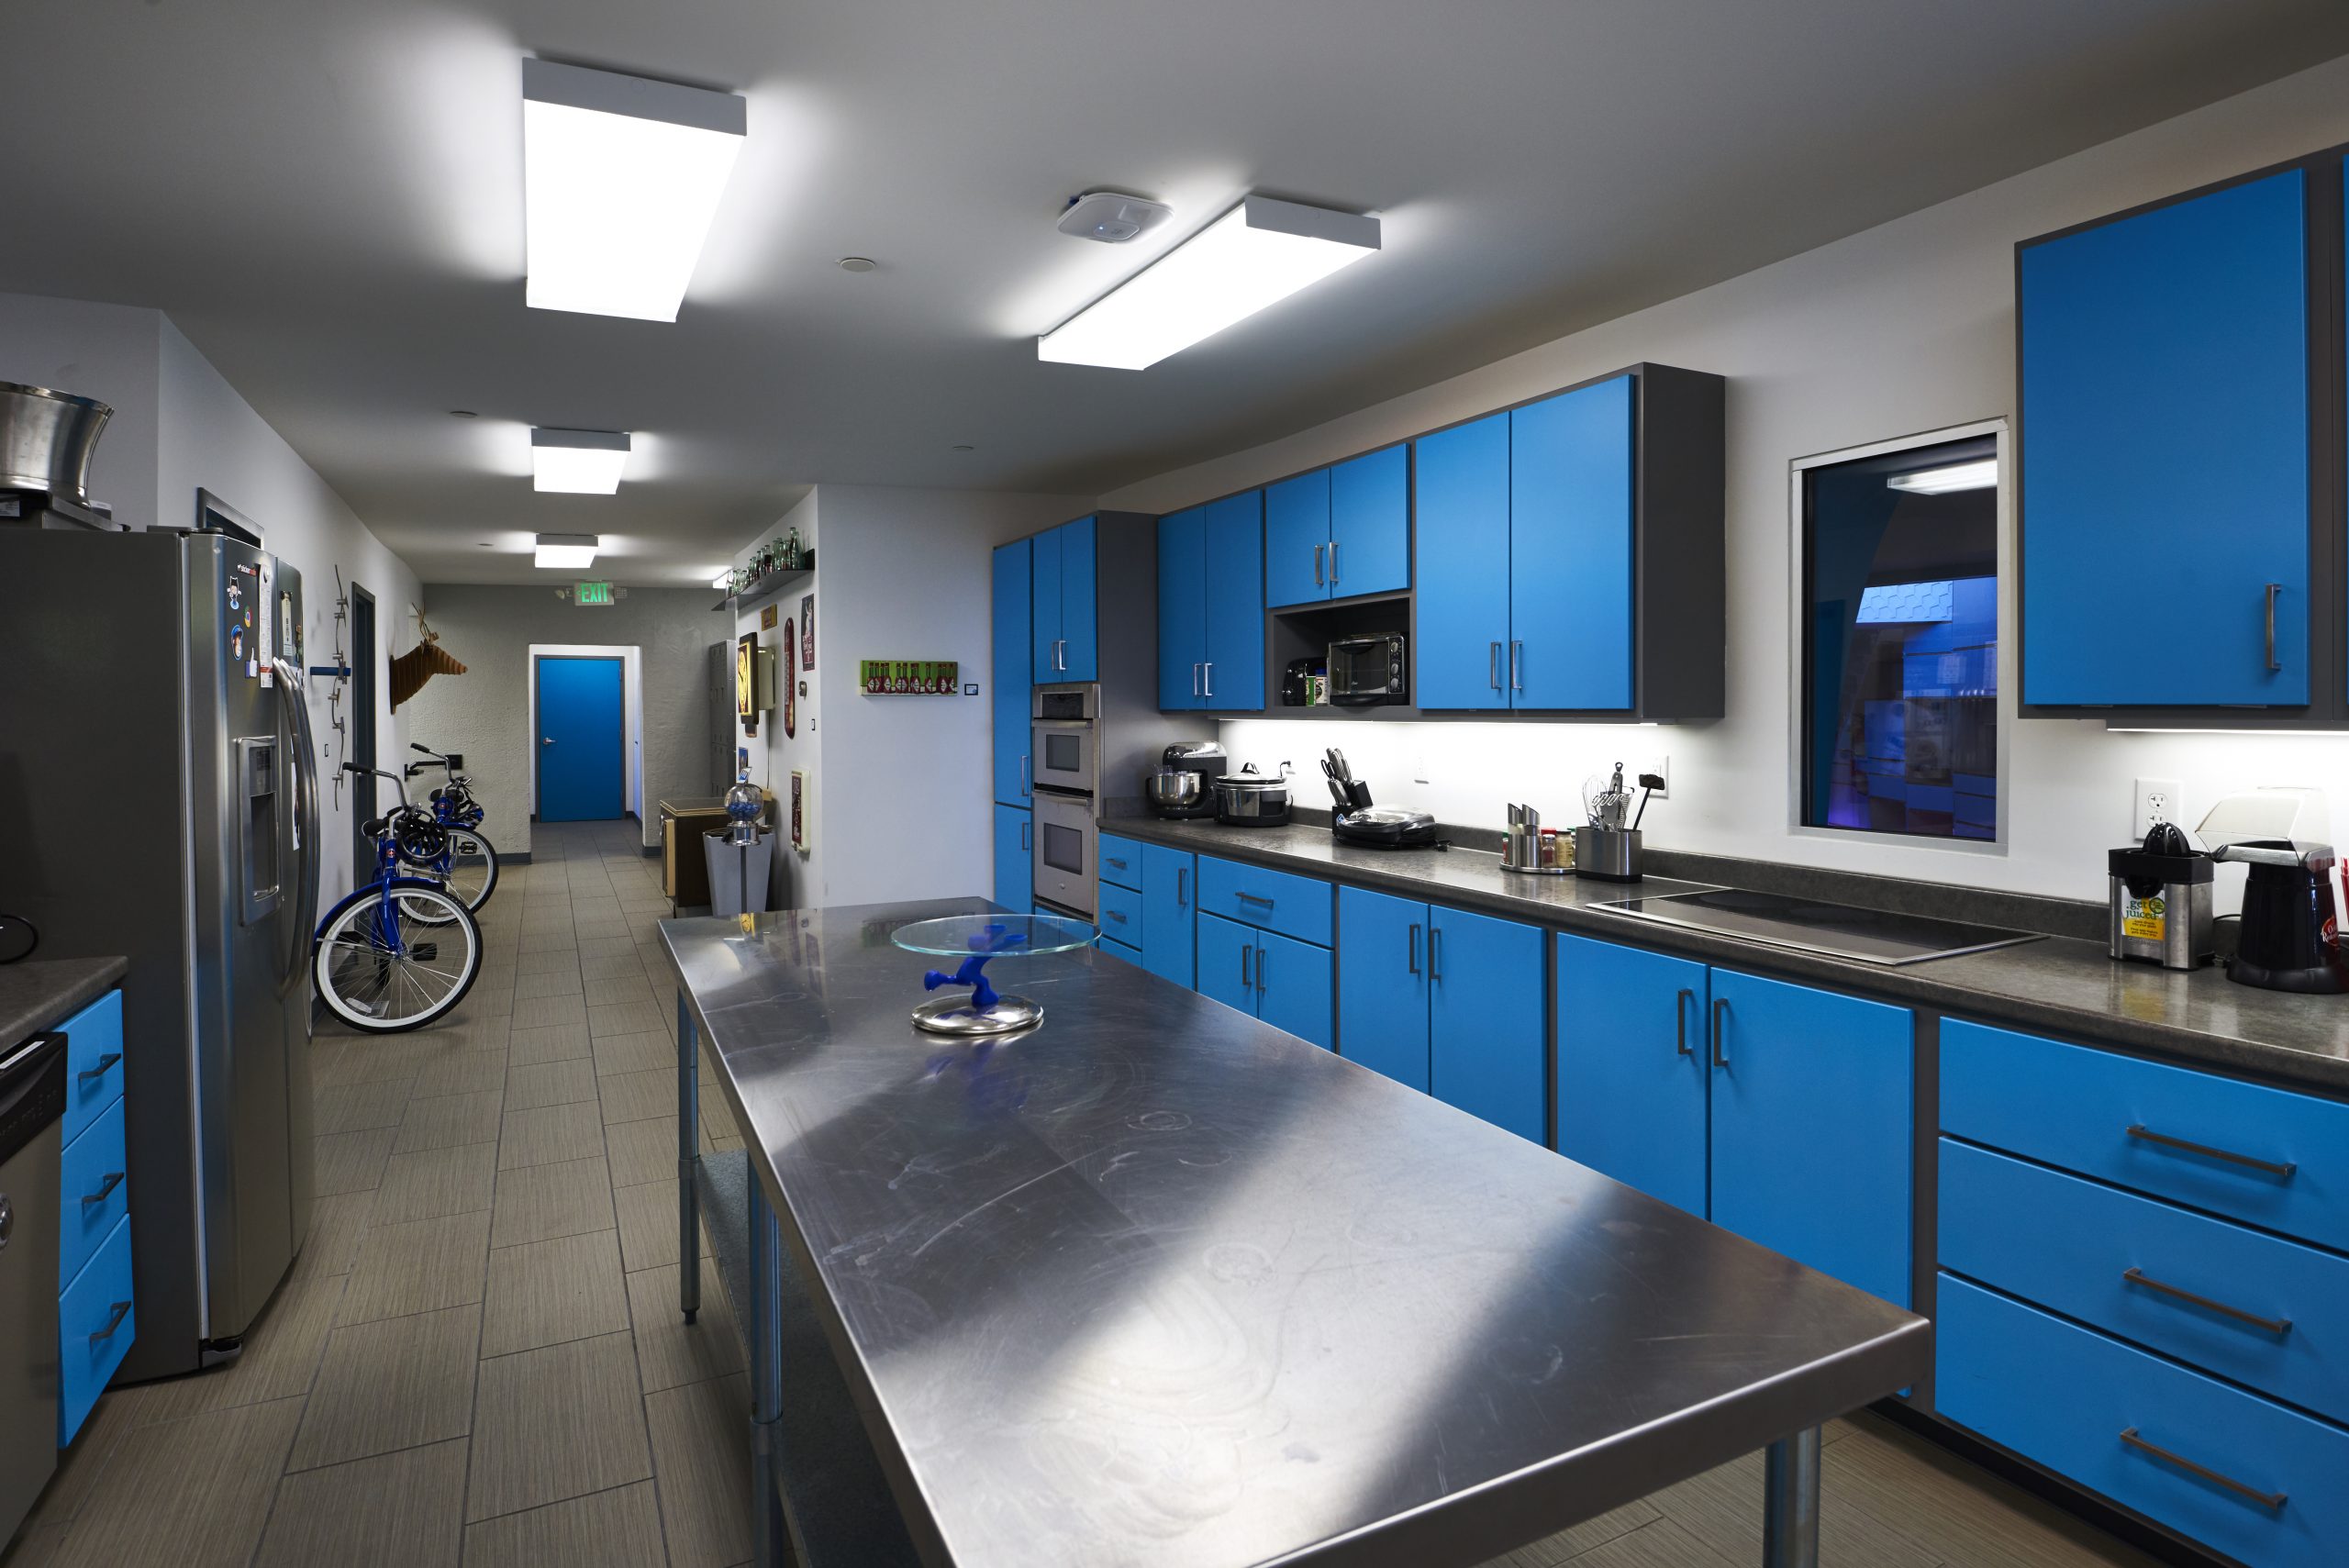 Photo of the Kinetic kitchen.